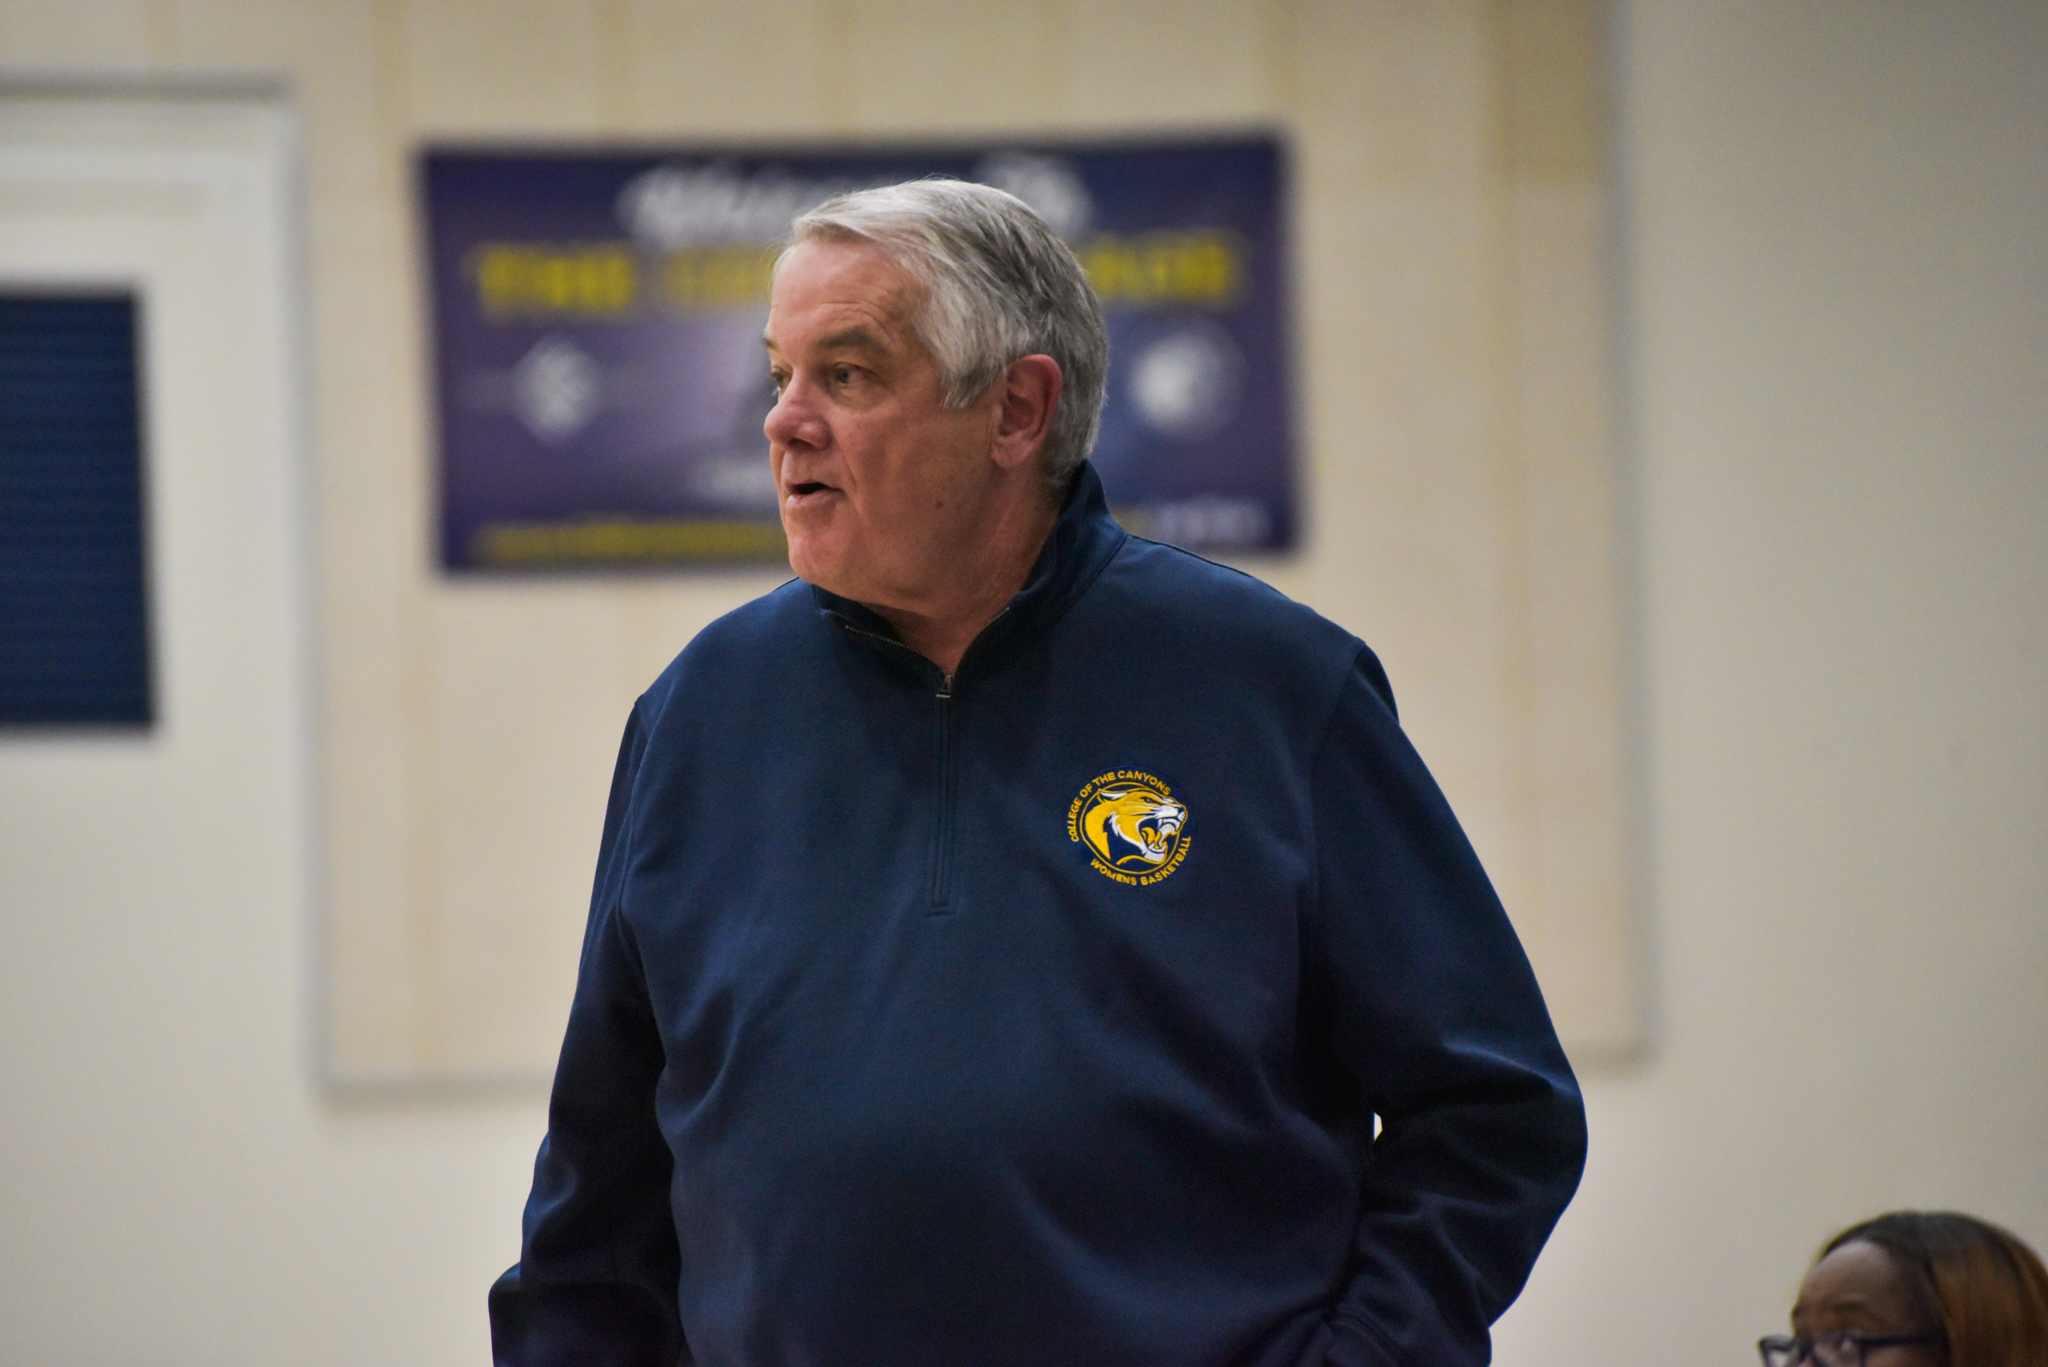 Longtime College of the Canyons women's basketball coach Greg Herrick has announced he will be stepping down after a 30-year run with the program that included 611 career wins, 16 Western State Conference (WSC), South Division Championships and 24 postseason appearances. —Mari Kneisel/COC Sports Information